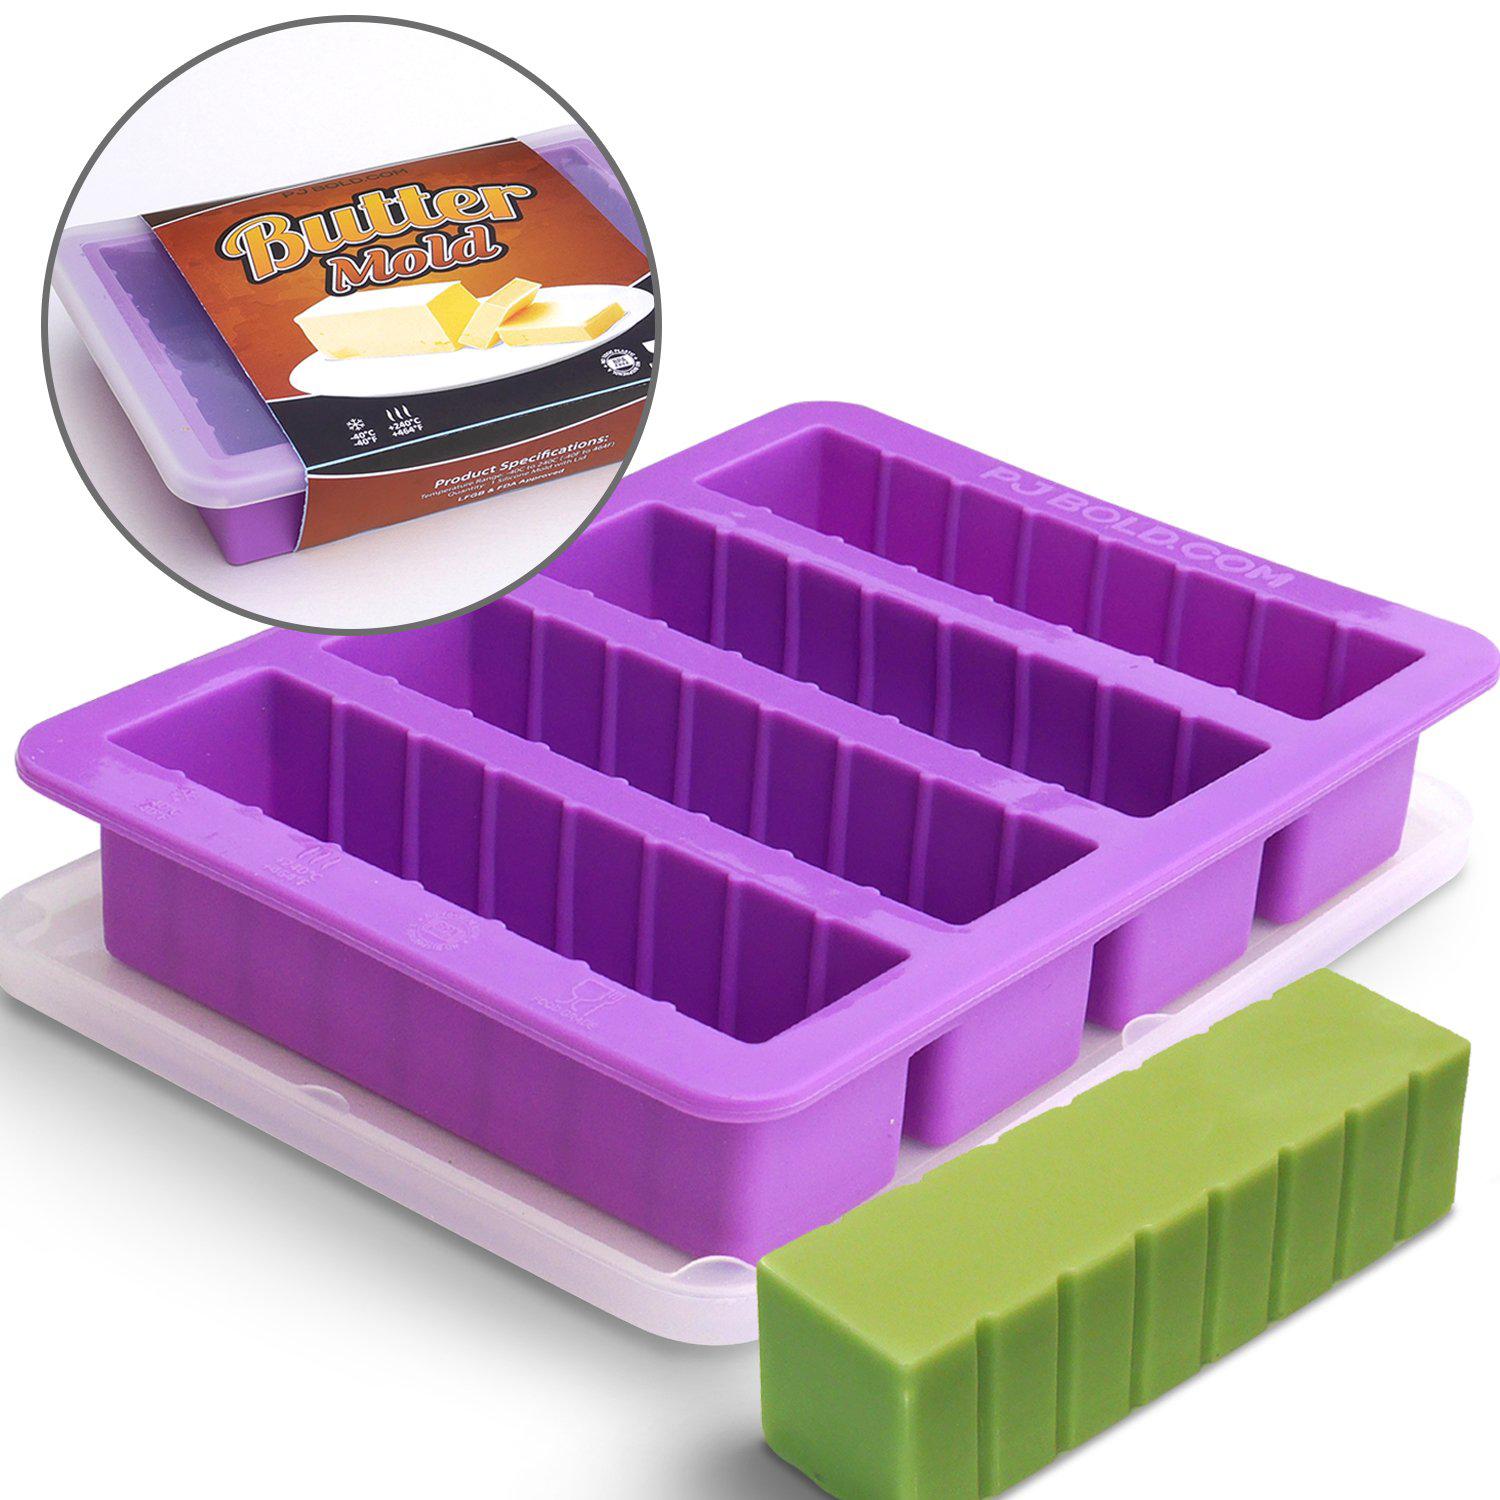 Silicone-Made Wholesale Silicone Butter Mold for Baking 